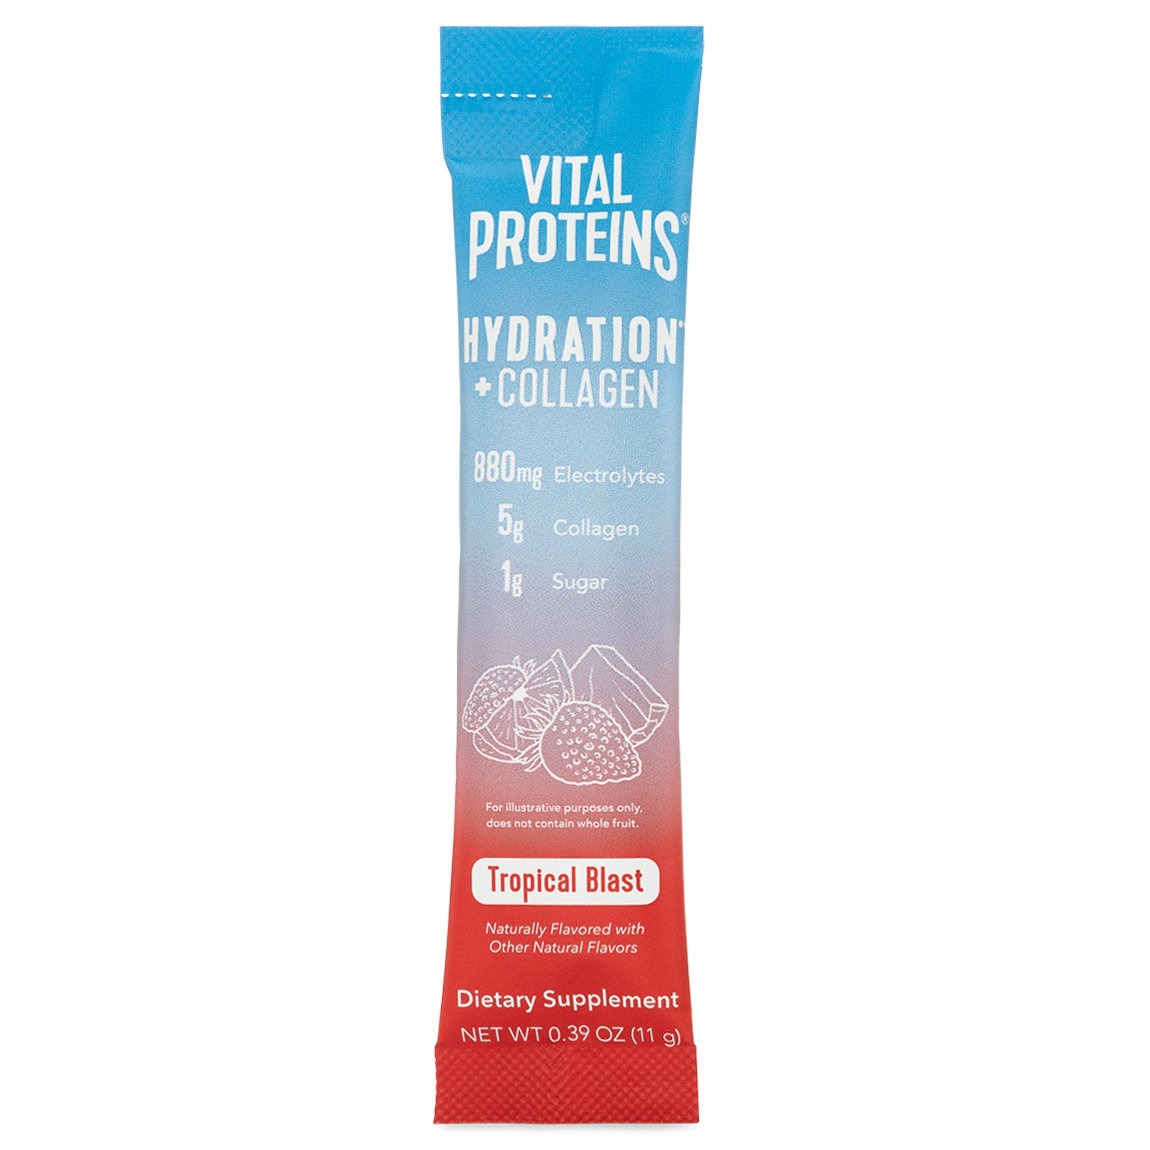 Vital Proteins Hydration + Collagen Stick Pack Box Tropical Blast alternative view 1 - product swatch.